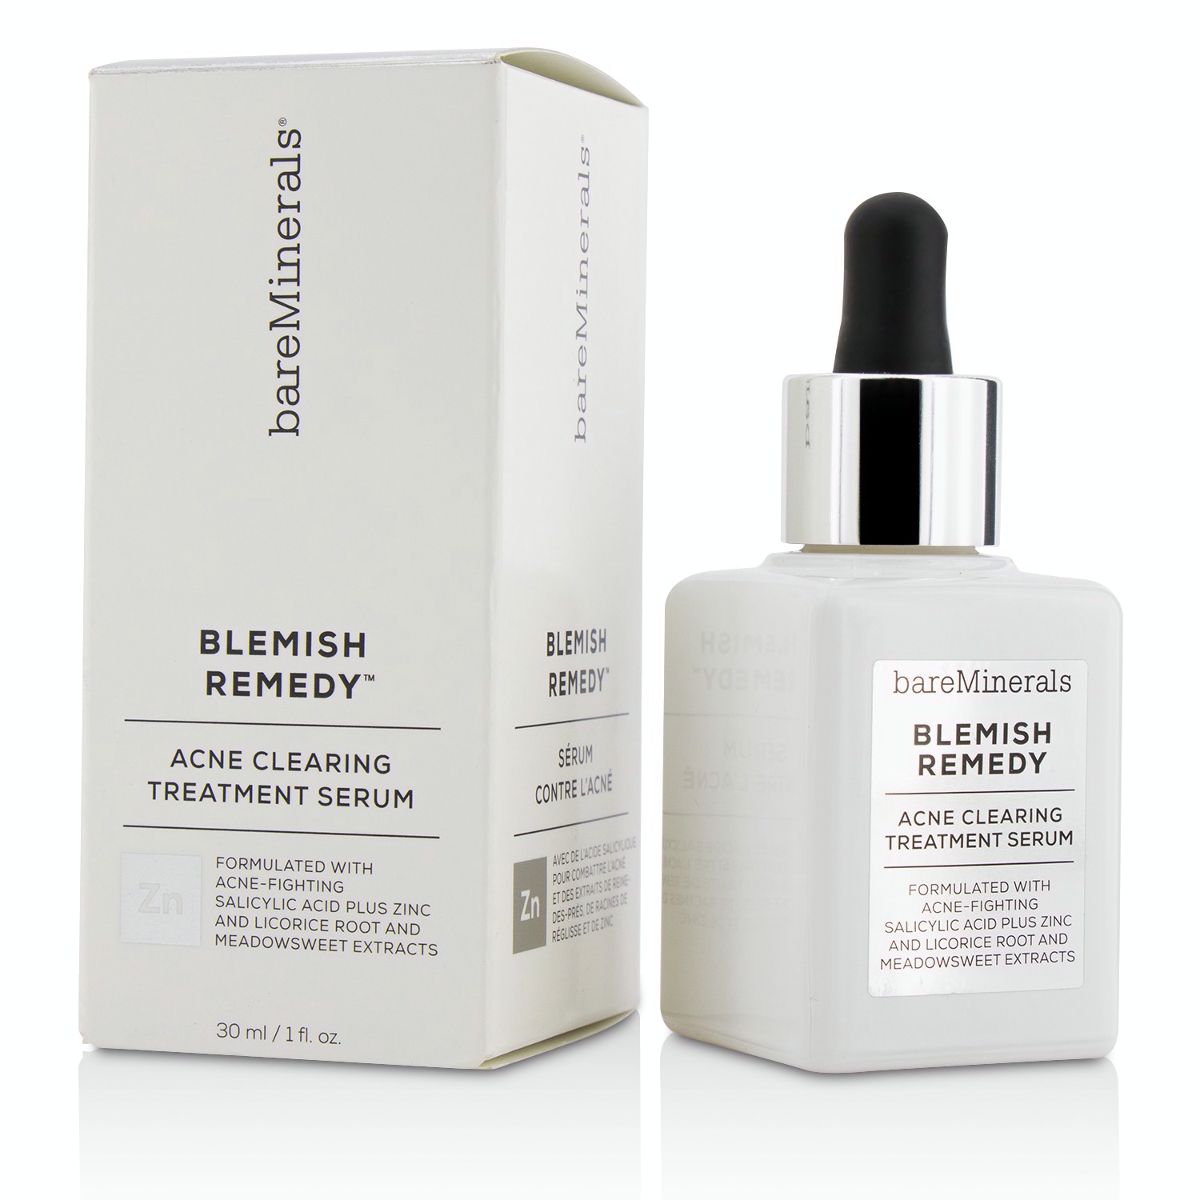 Blemish Remedy Acne Clearing Treatment Serum BareMinerals Image